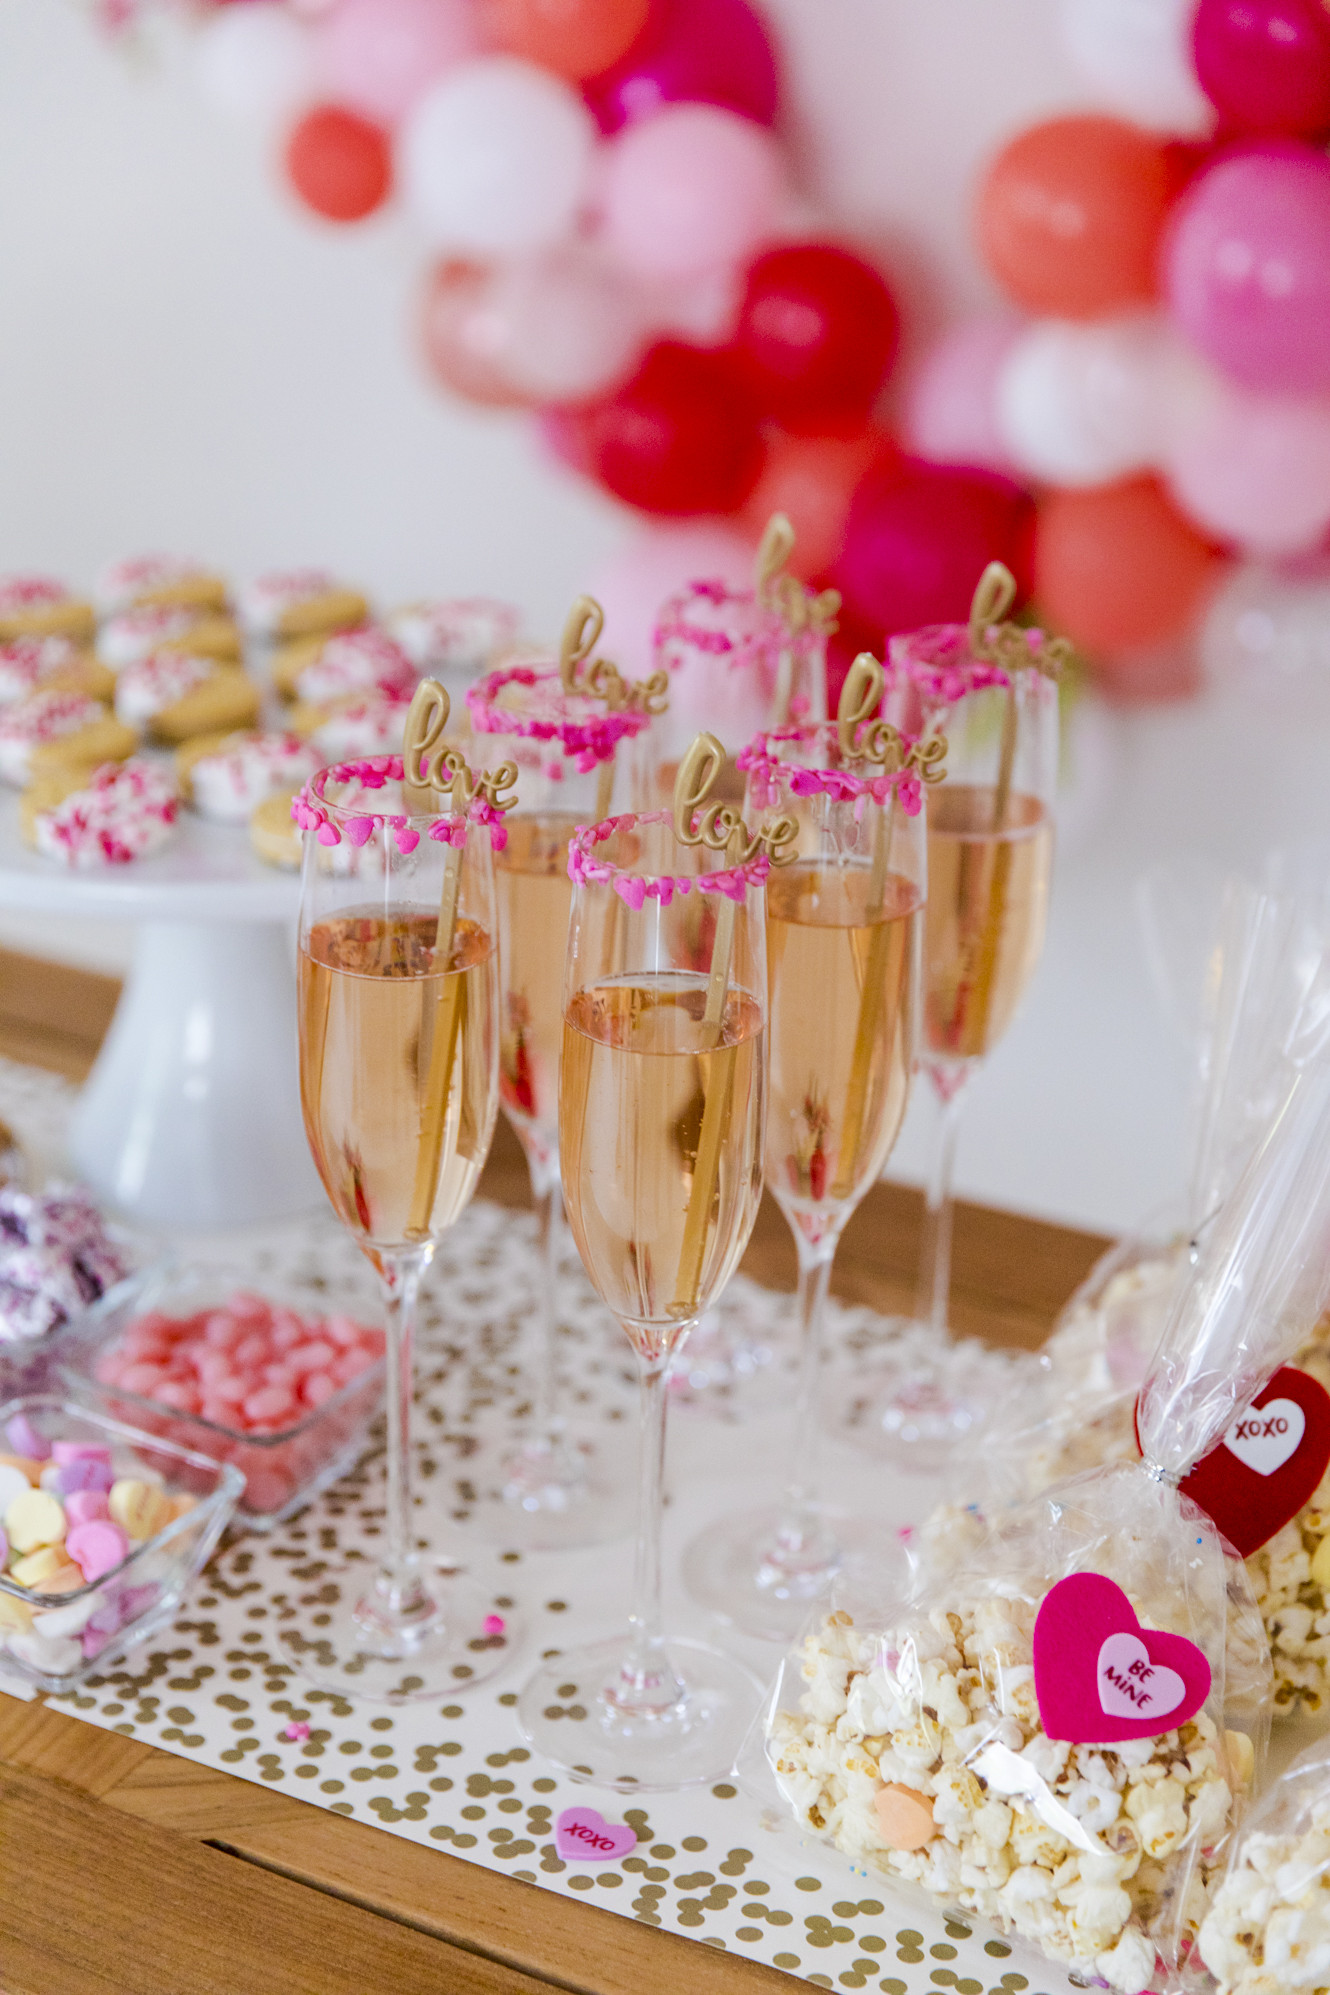 Valentines Day Pic Ideas
 Six Ideas for throwing the Best Valentine s Day Party